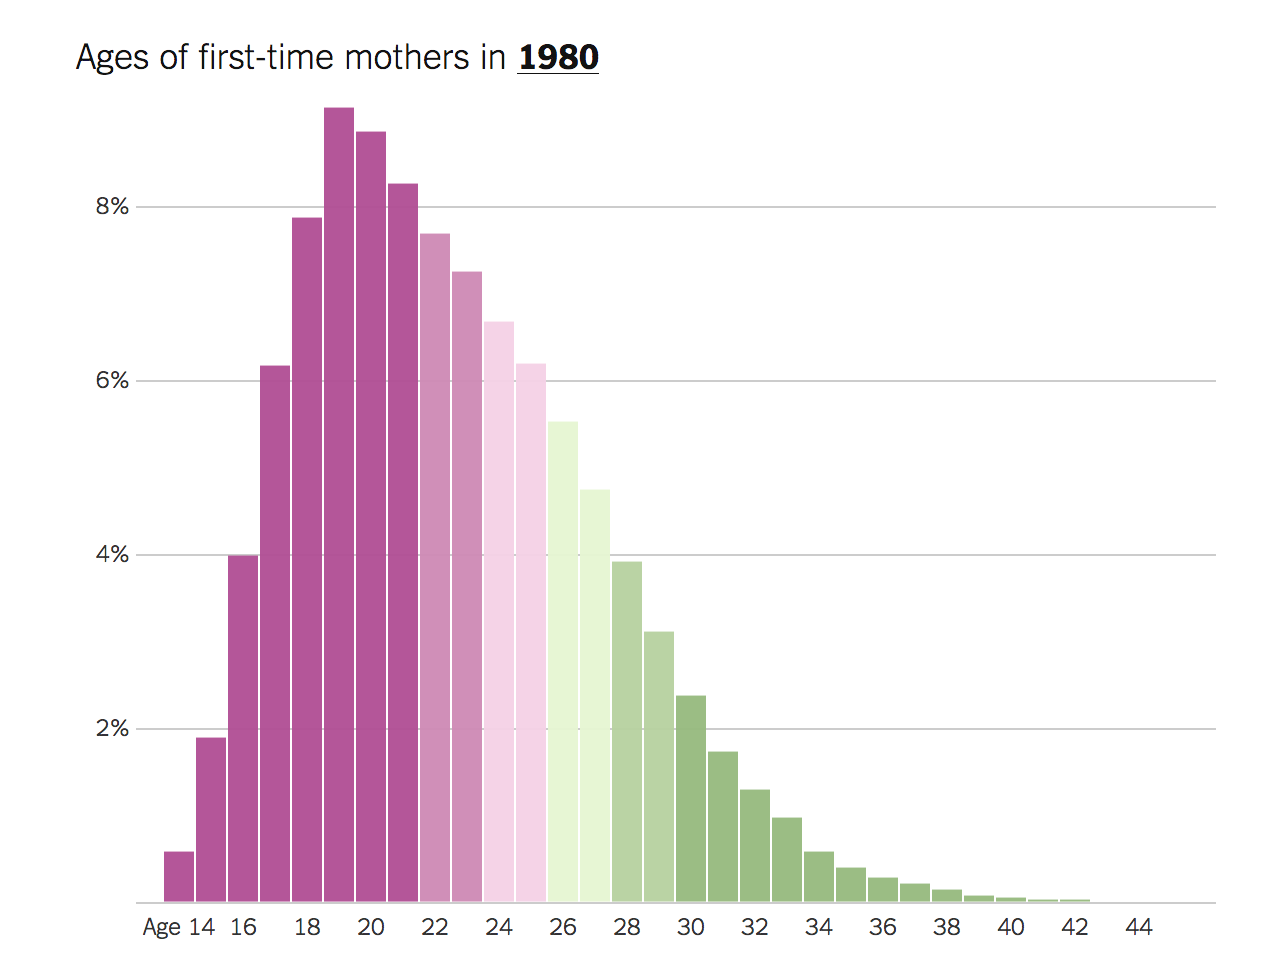 Tywkiwdbi Tai Wiki Widbee The Average Age Of First Time Mothers